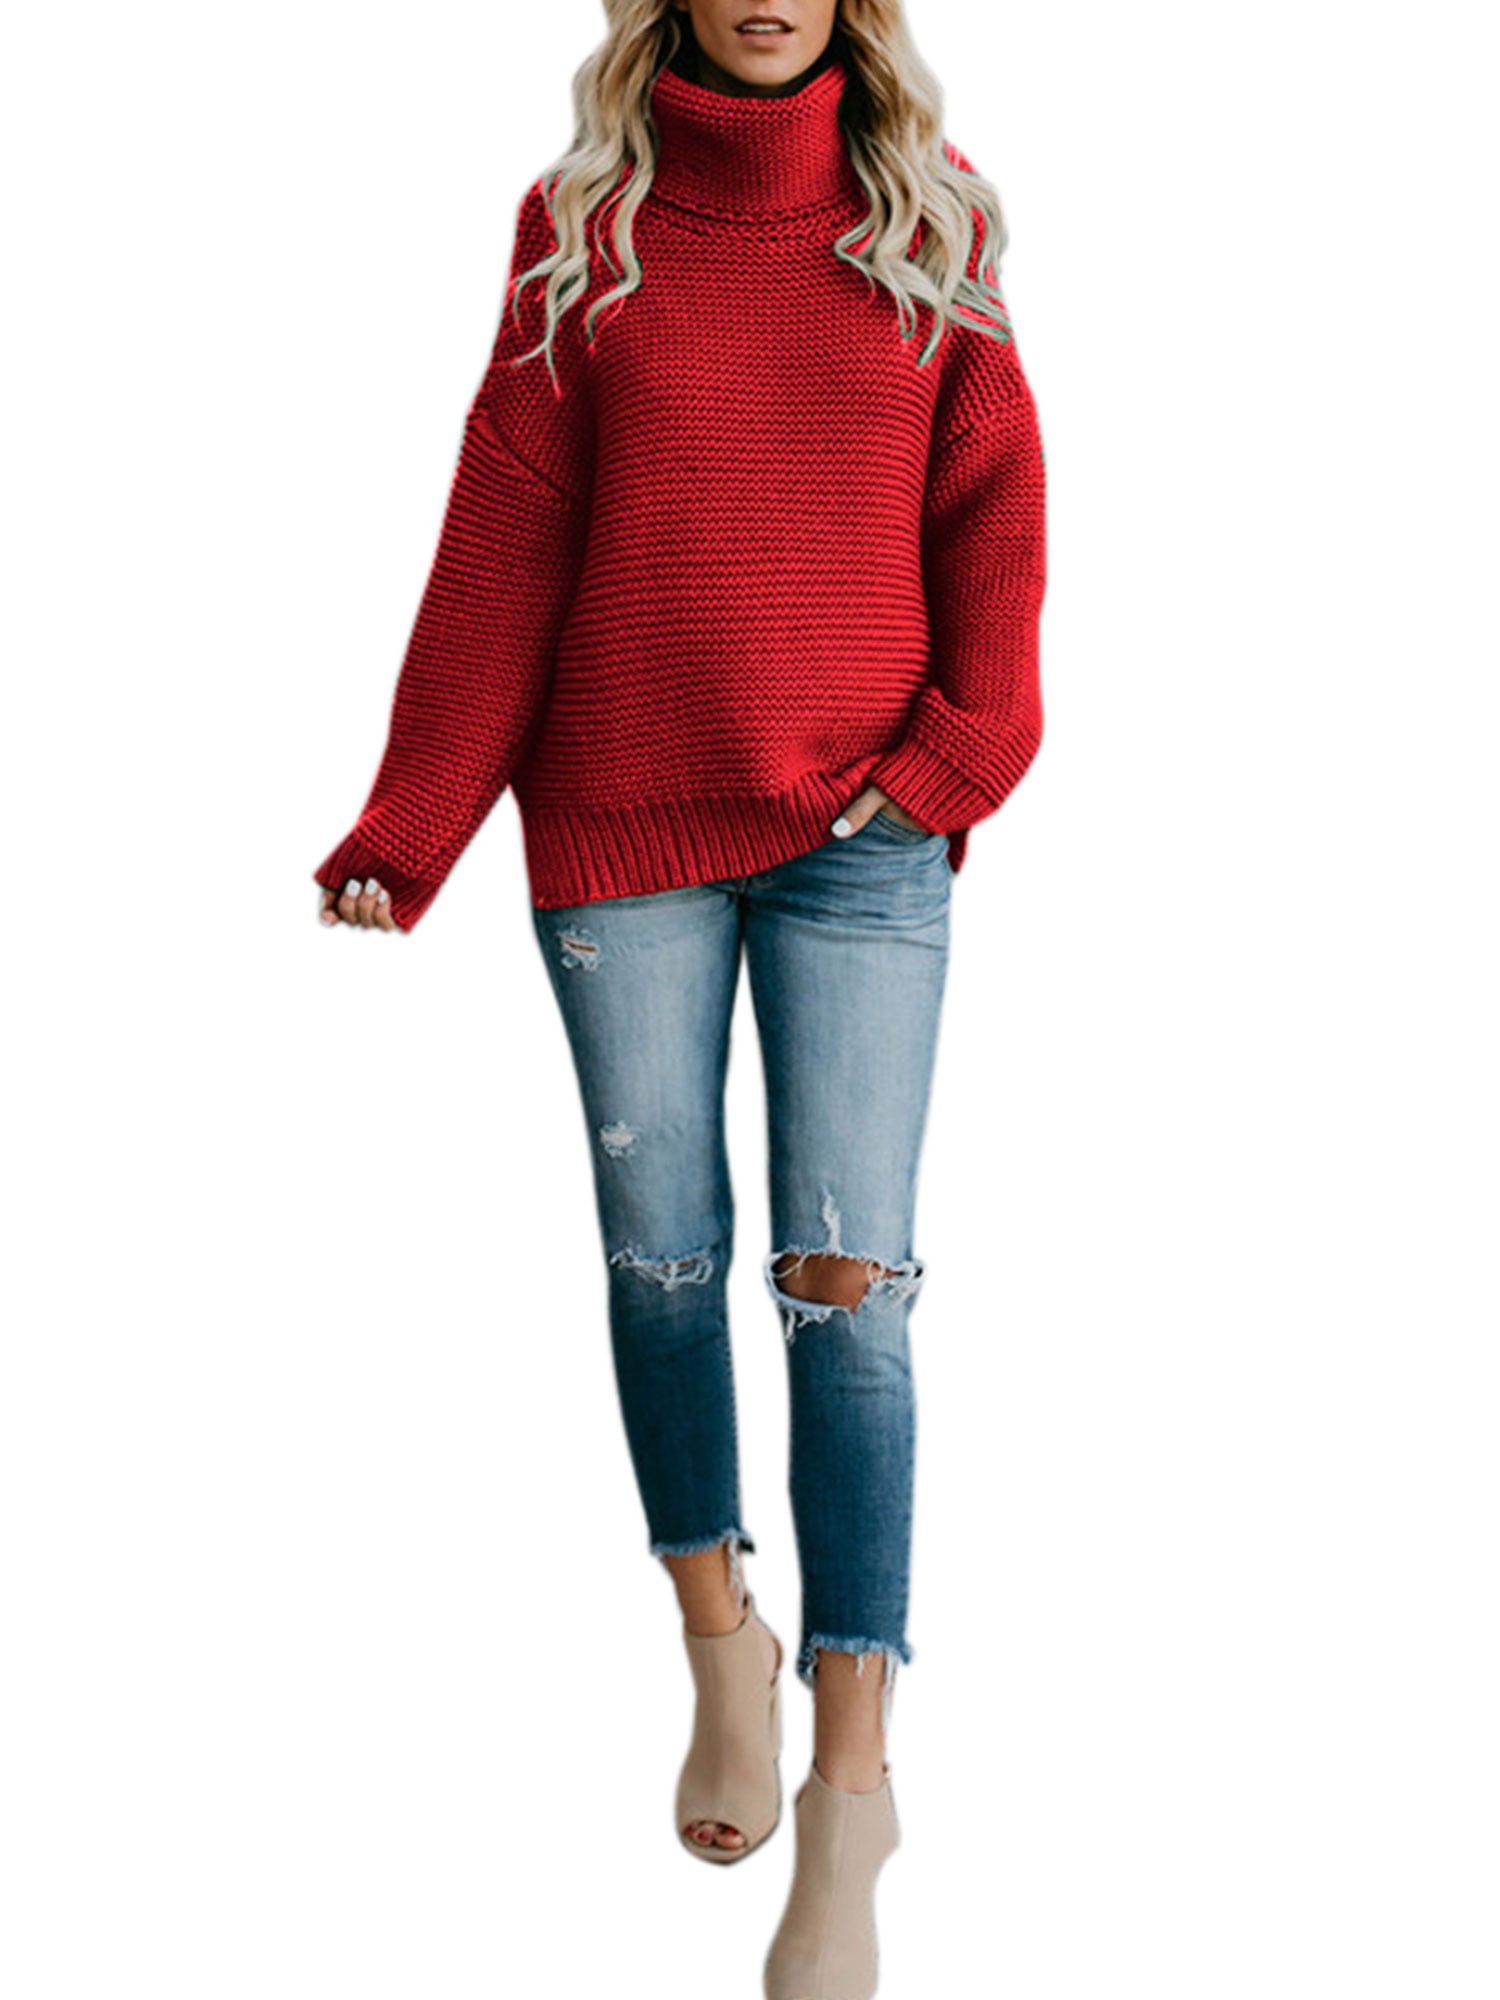 Turtleneck Warm Sweater Women Winter Pullover Knitted Thick Top Soft Cute Trendy